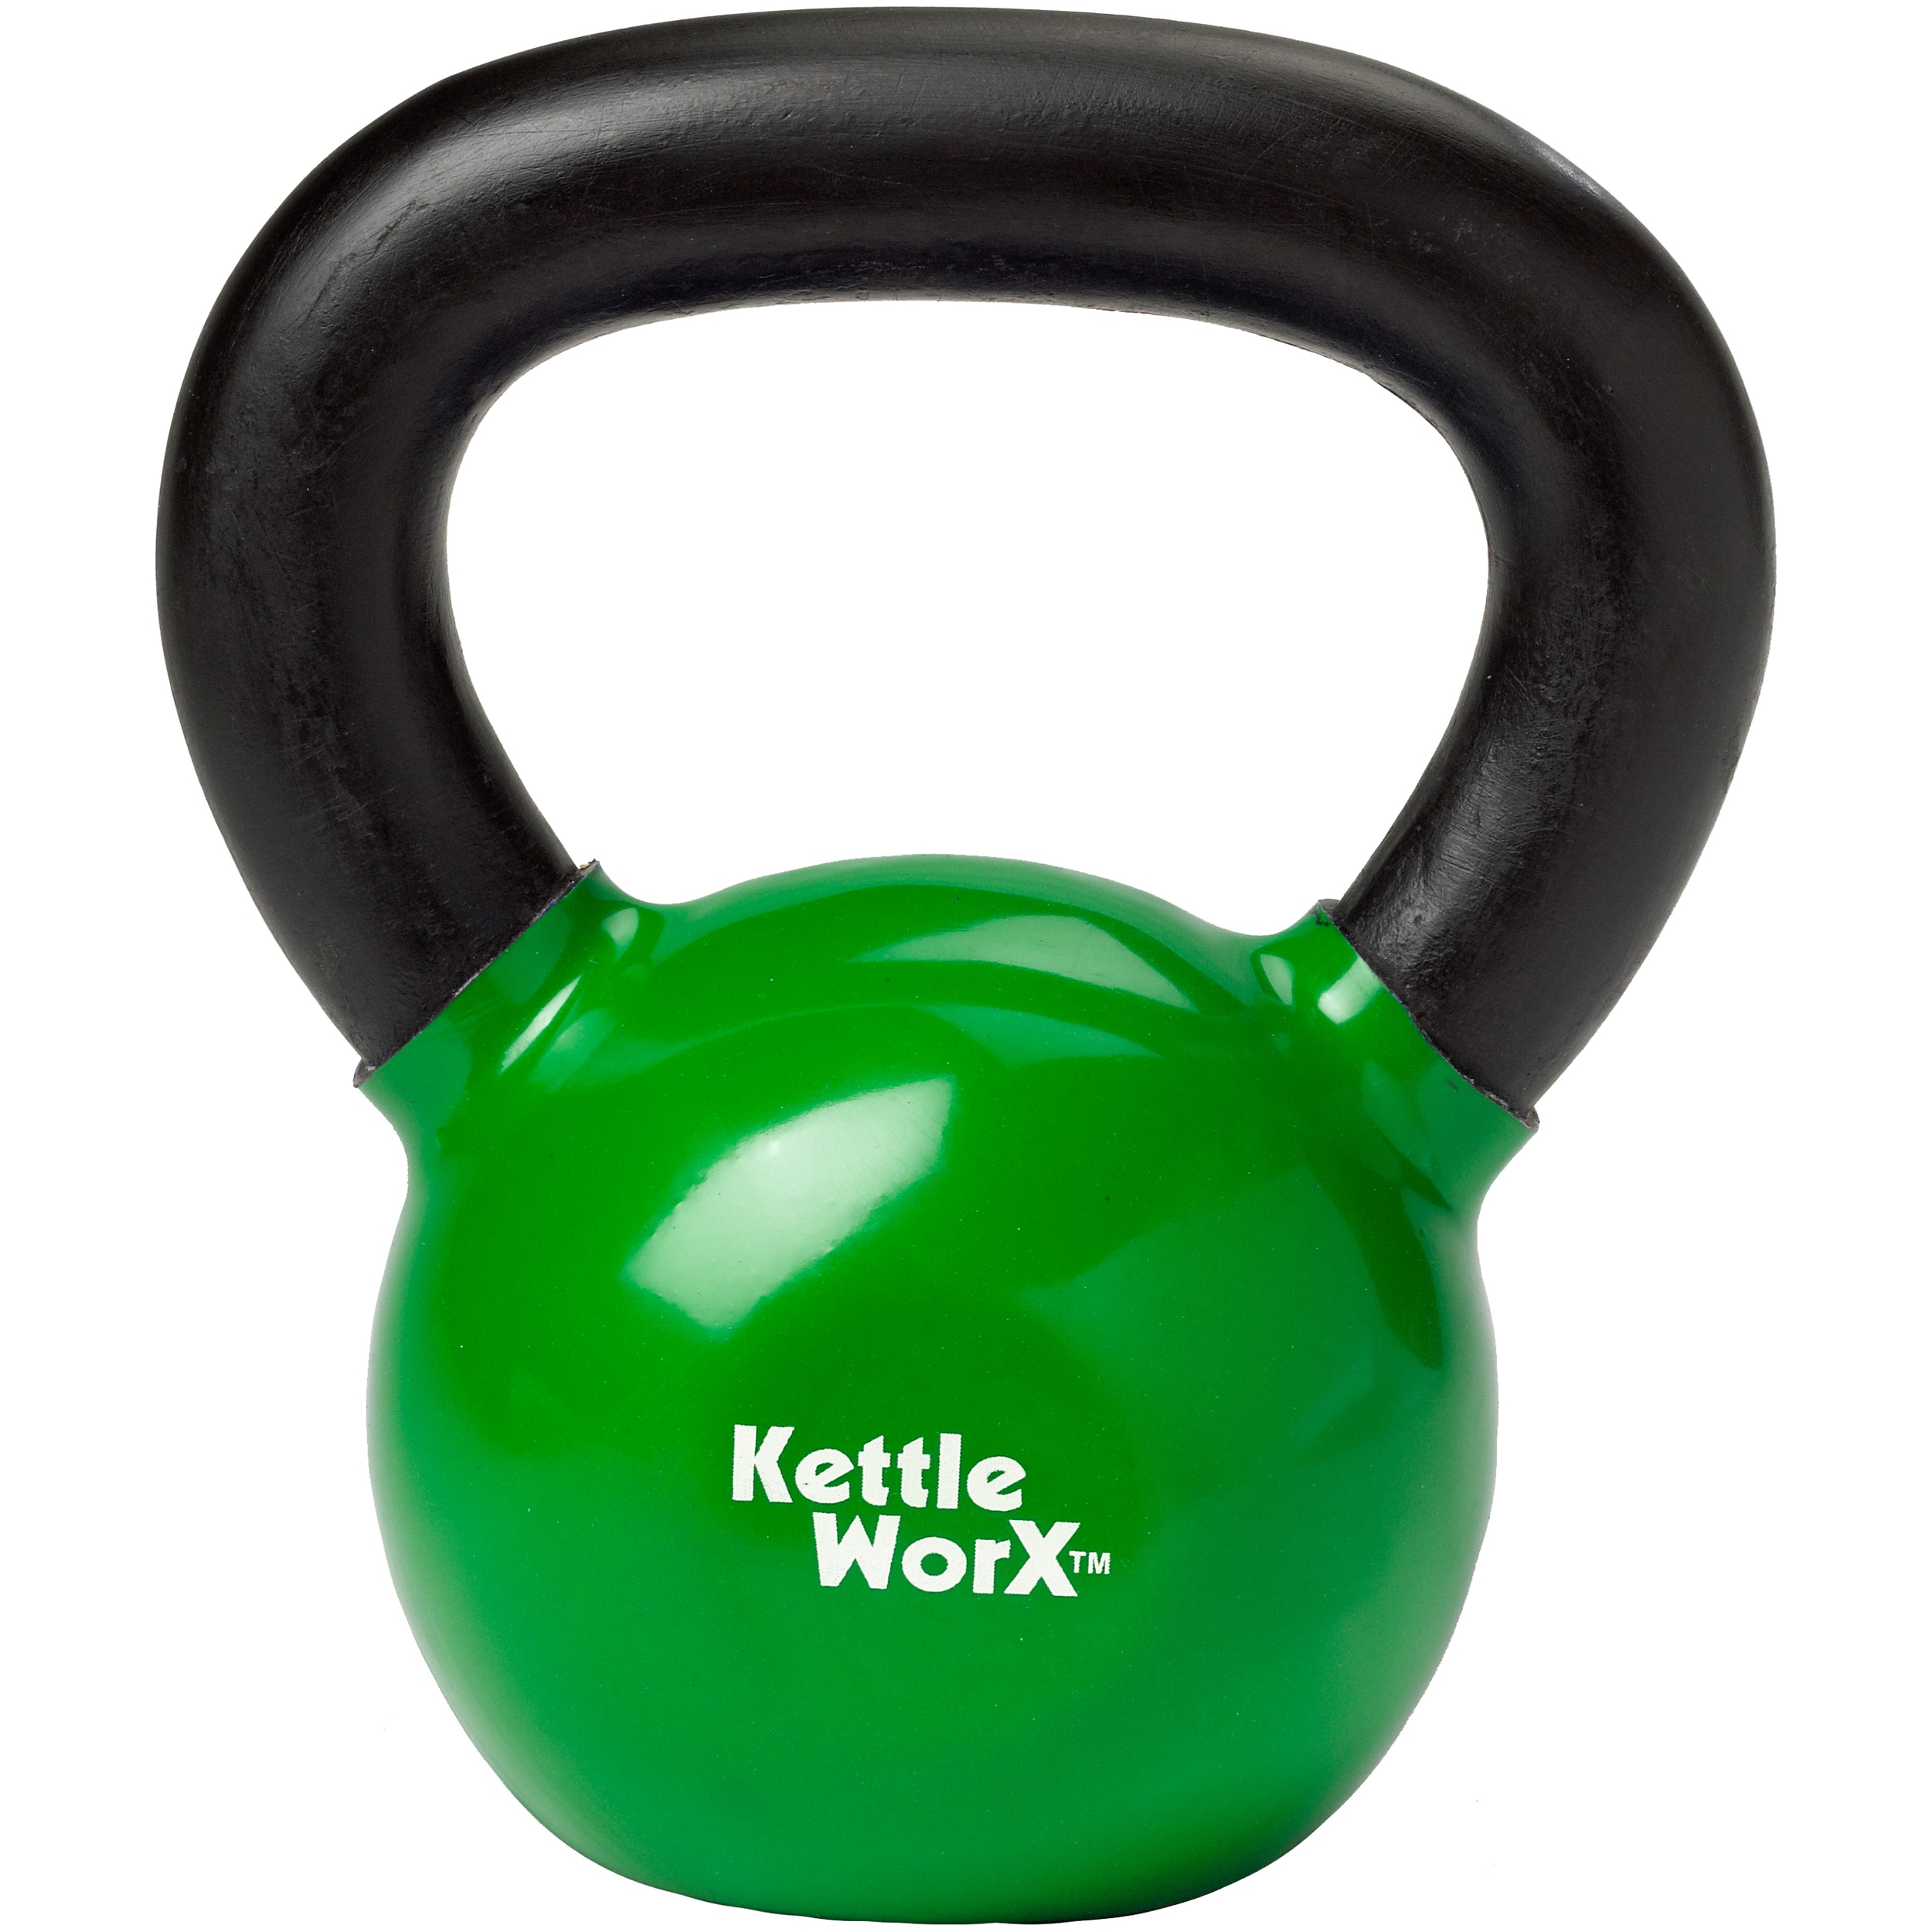 LIFELINE Cast Iron Kettlebell in the Kettlebells department at Lowes.com